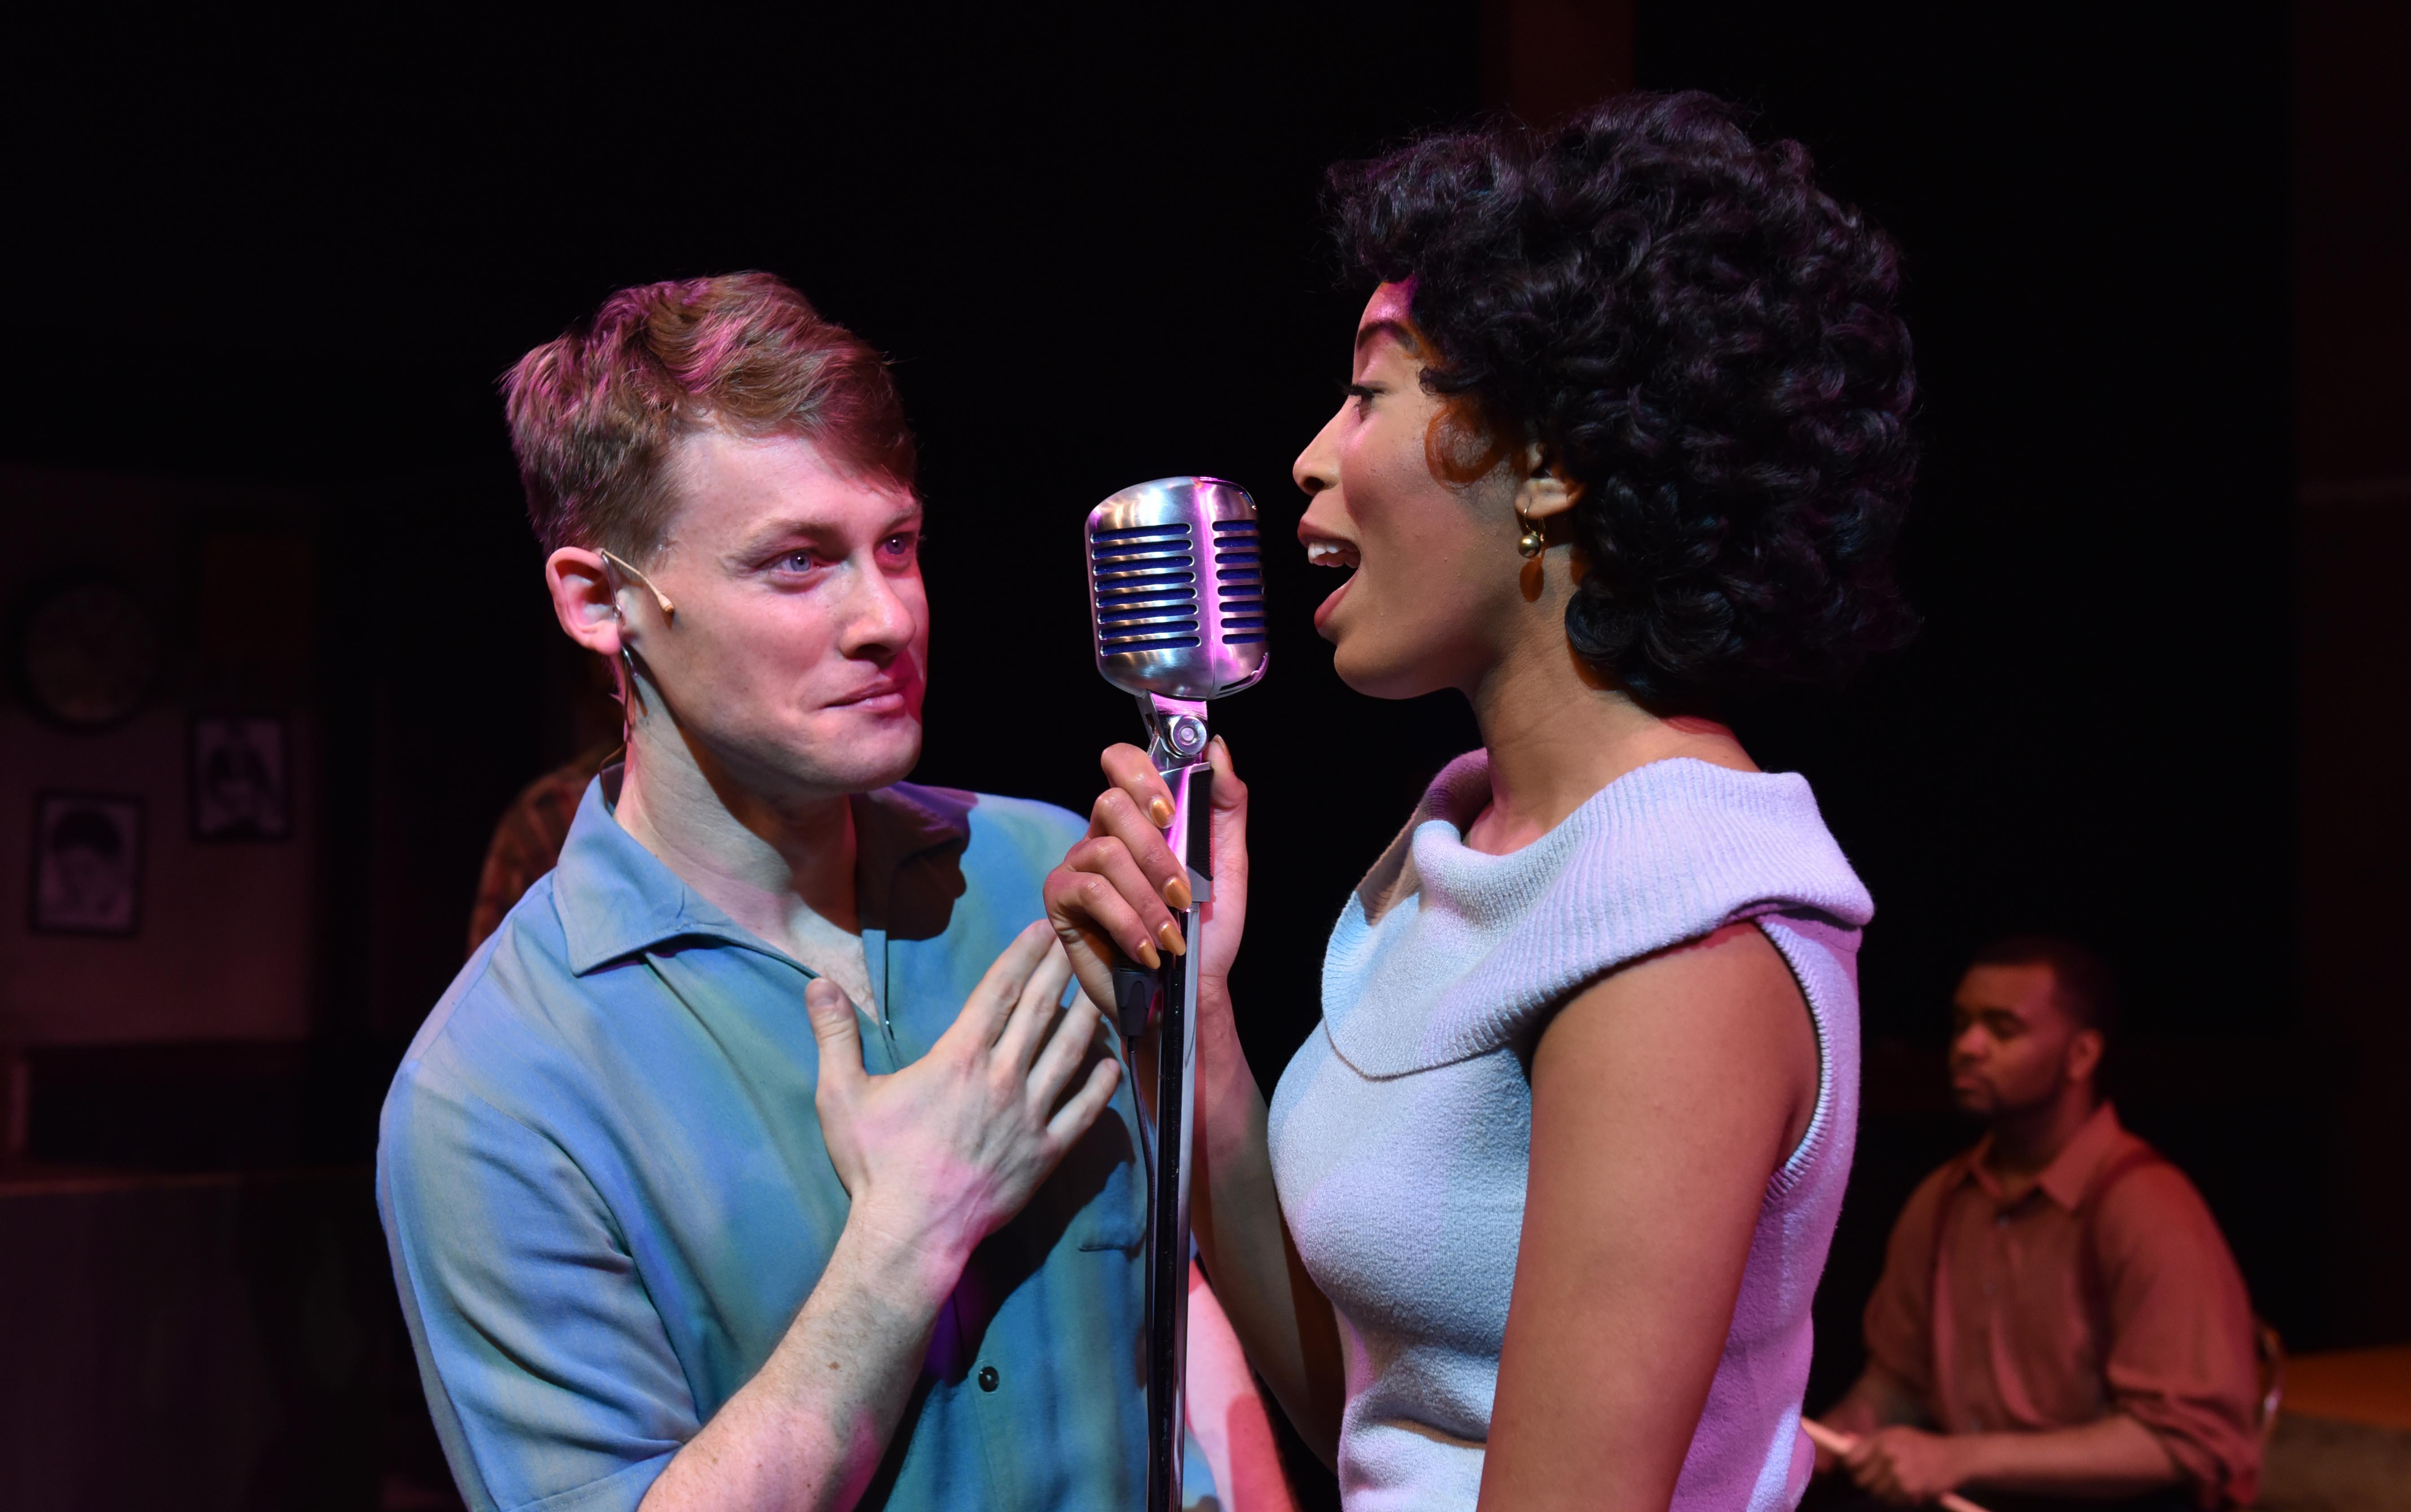 Liam Quealy as Huey Calhoun and Aeriel Williams as Felicia Farrell in “Memphis” from Porchlight Music Theatre. (Photo by Michael Courier)